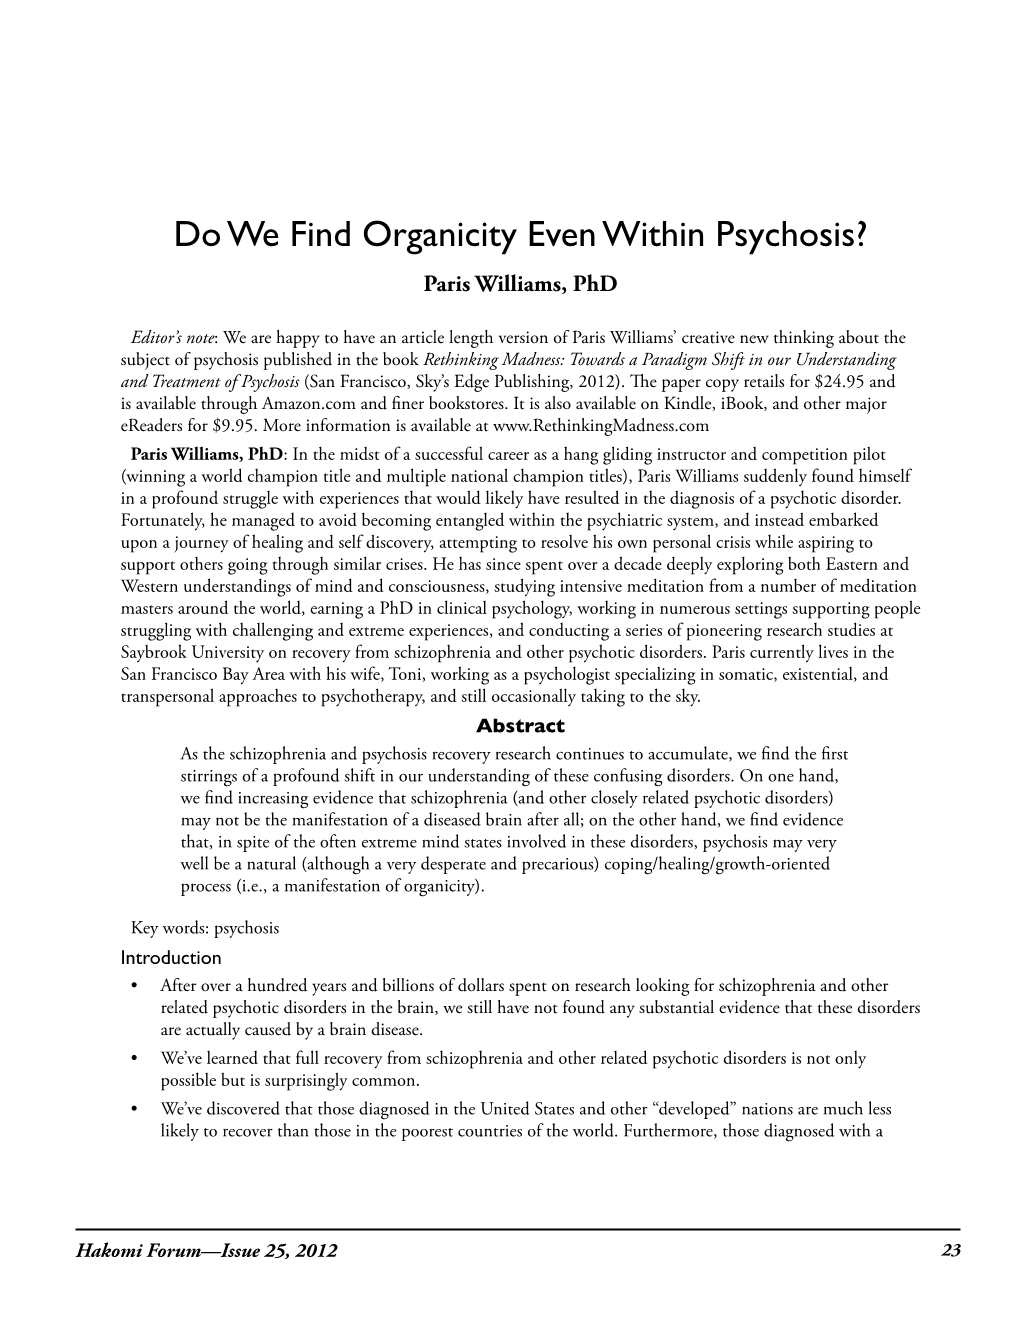 Do We Find Organicity Even Within Psychosis? Paris Williams, Phd